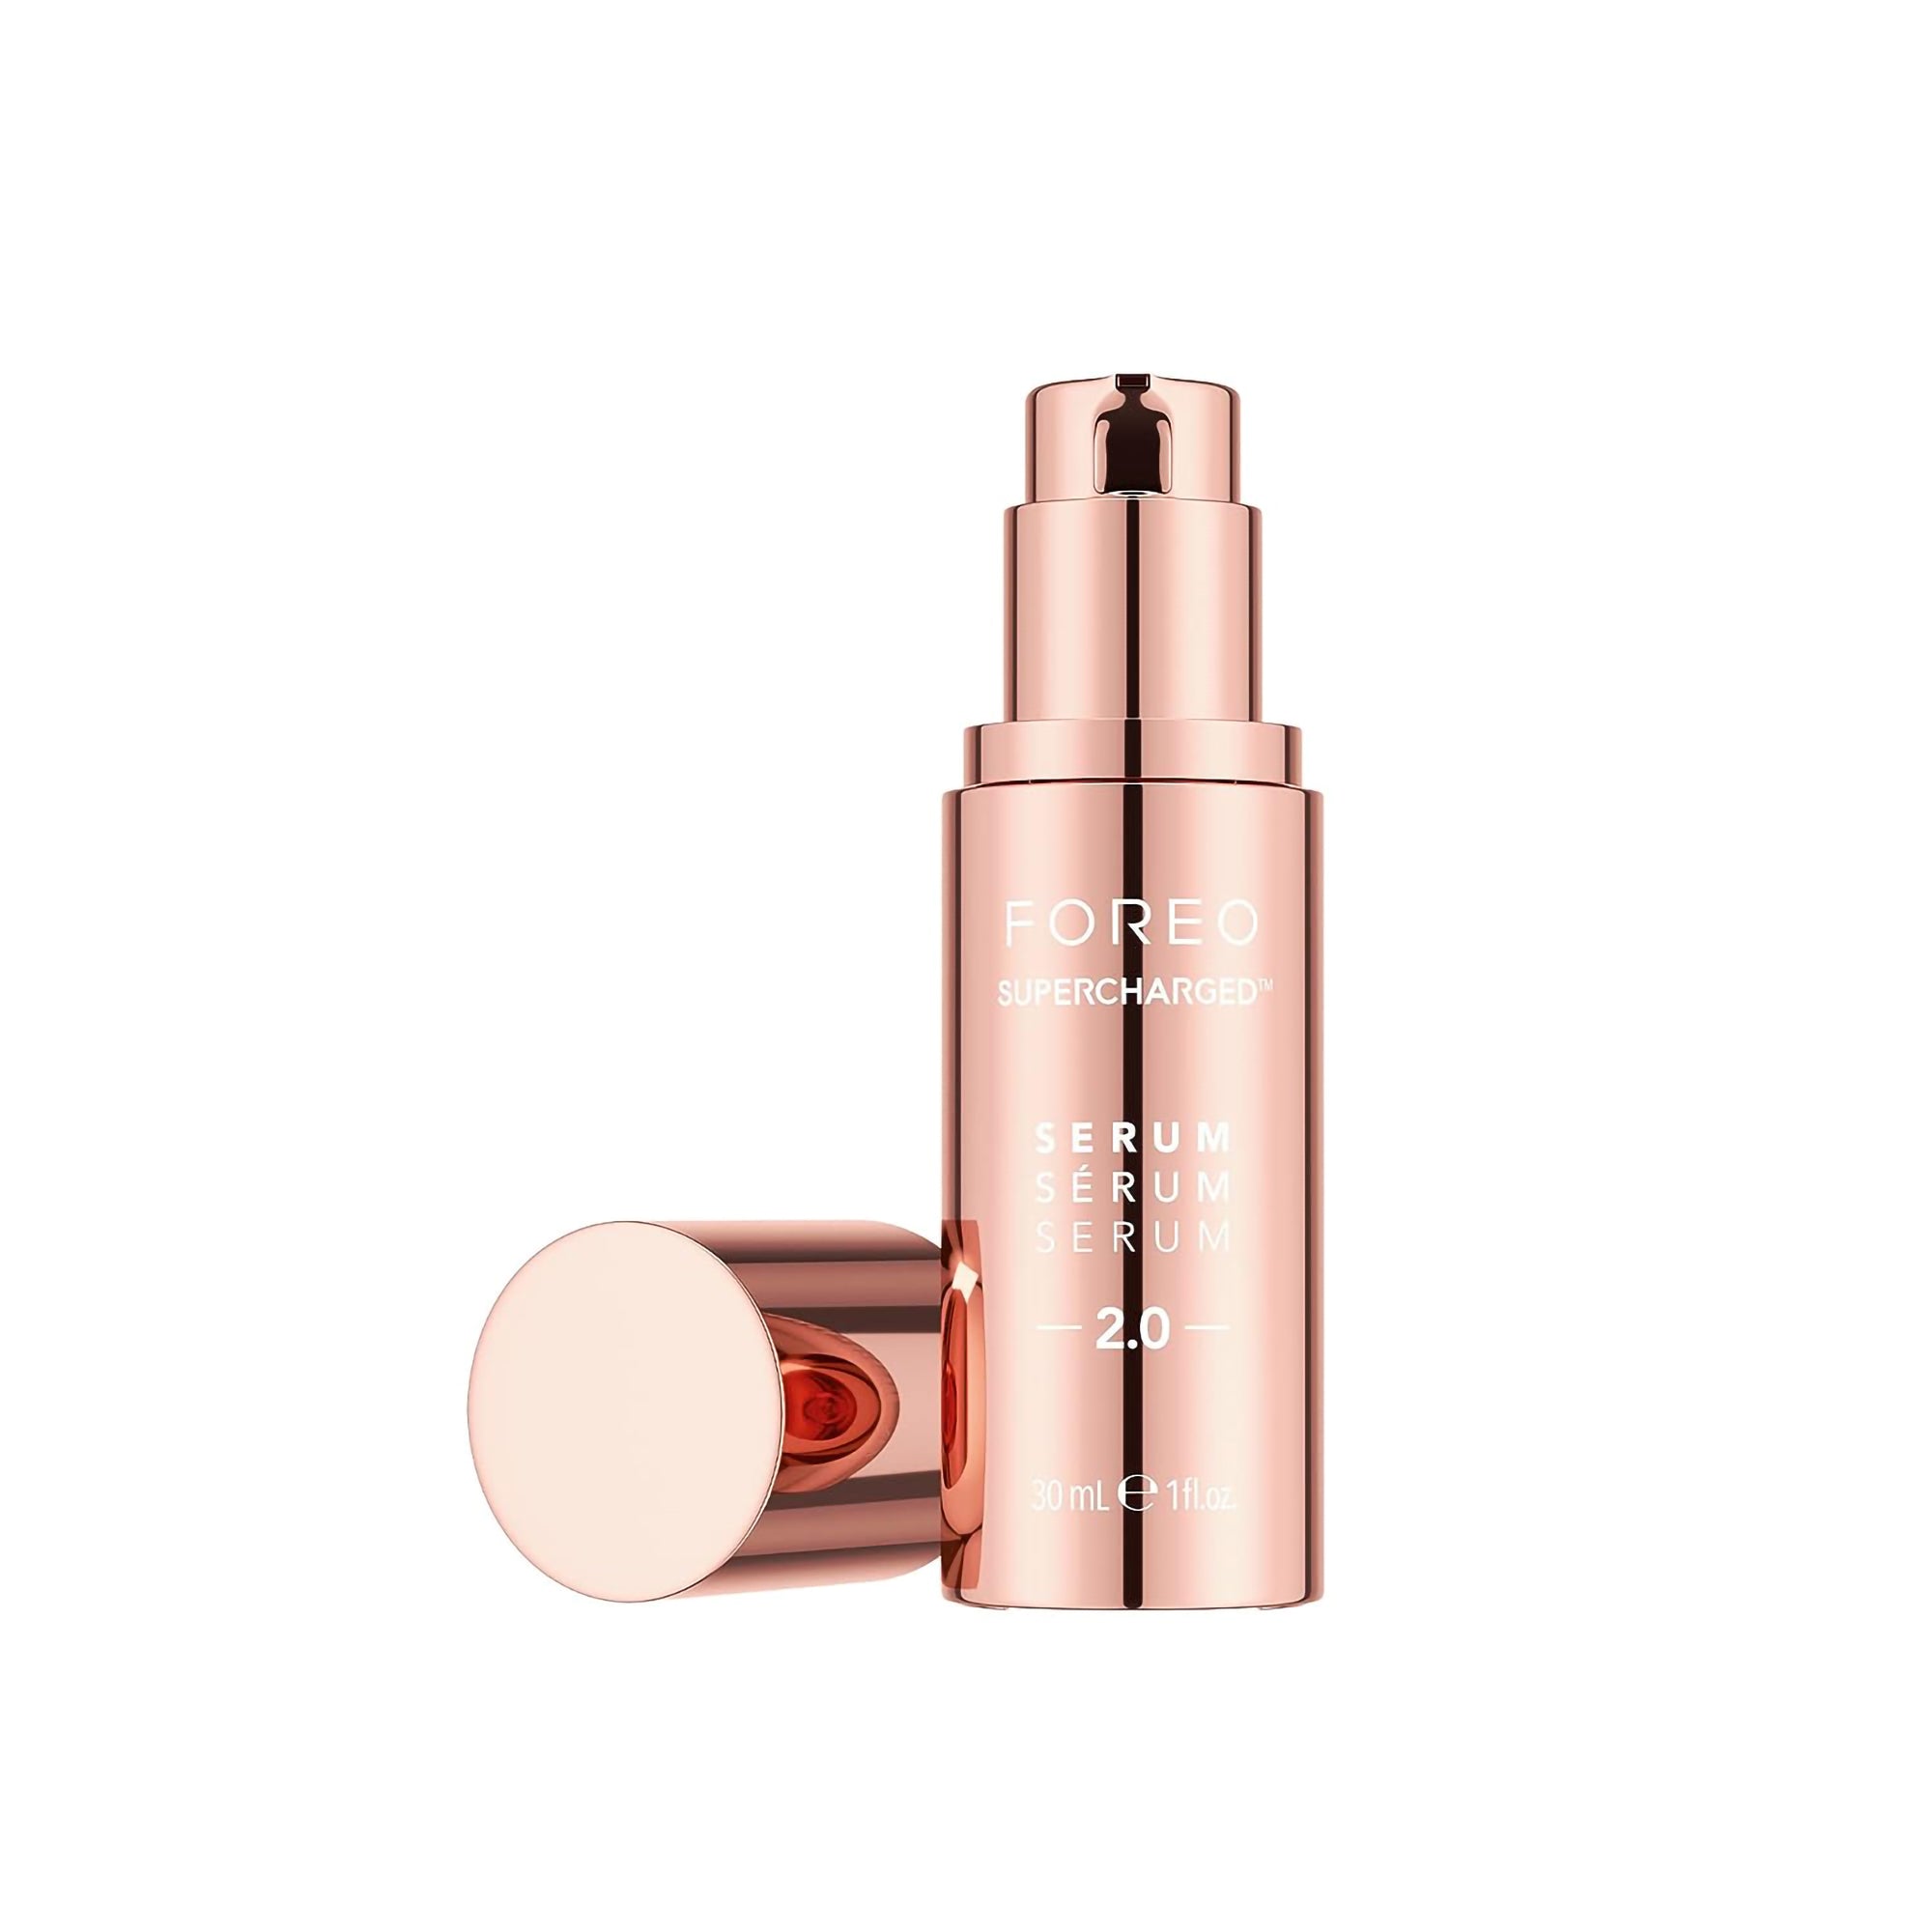 Foreo SUPERCHARGED Serum 2.0 / 30ML